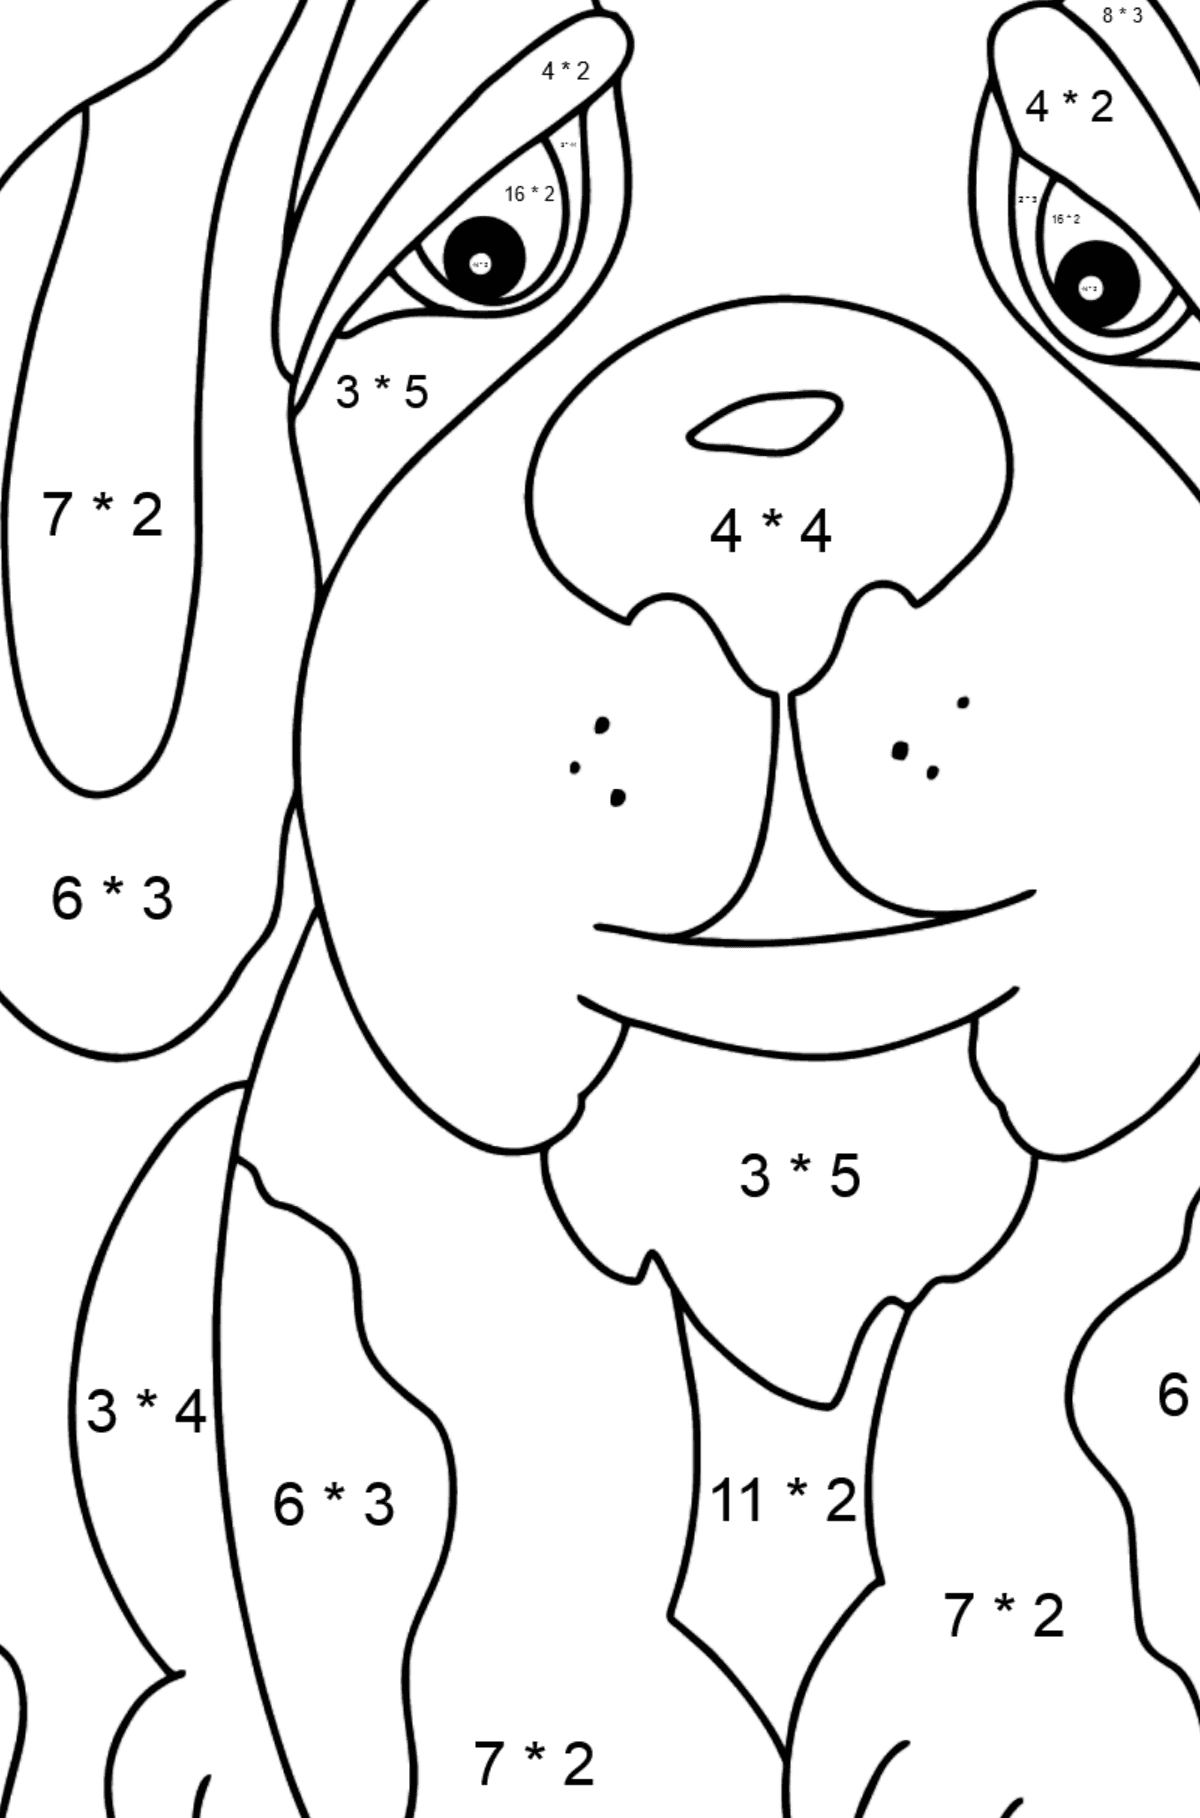 Coloring Page - A Dog is Watching a Butterfly - Math Coloring - Multiplication for Kids